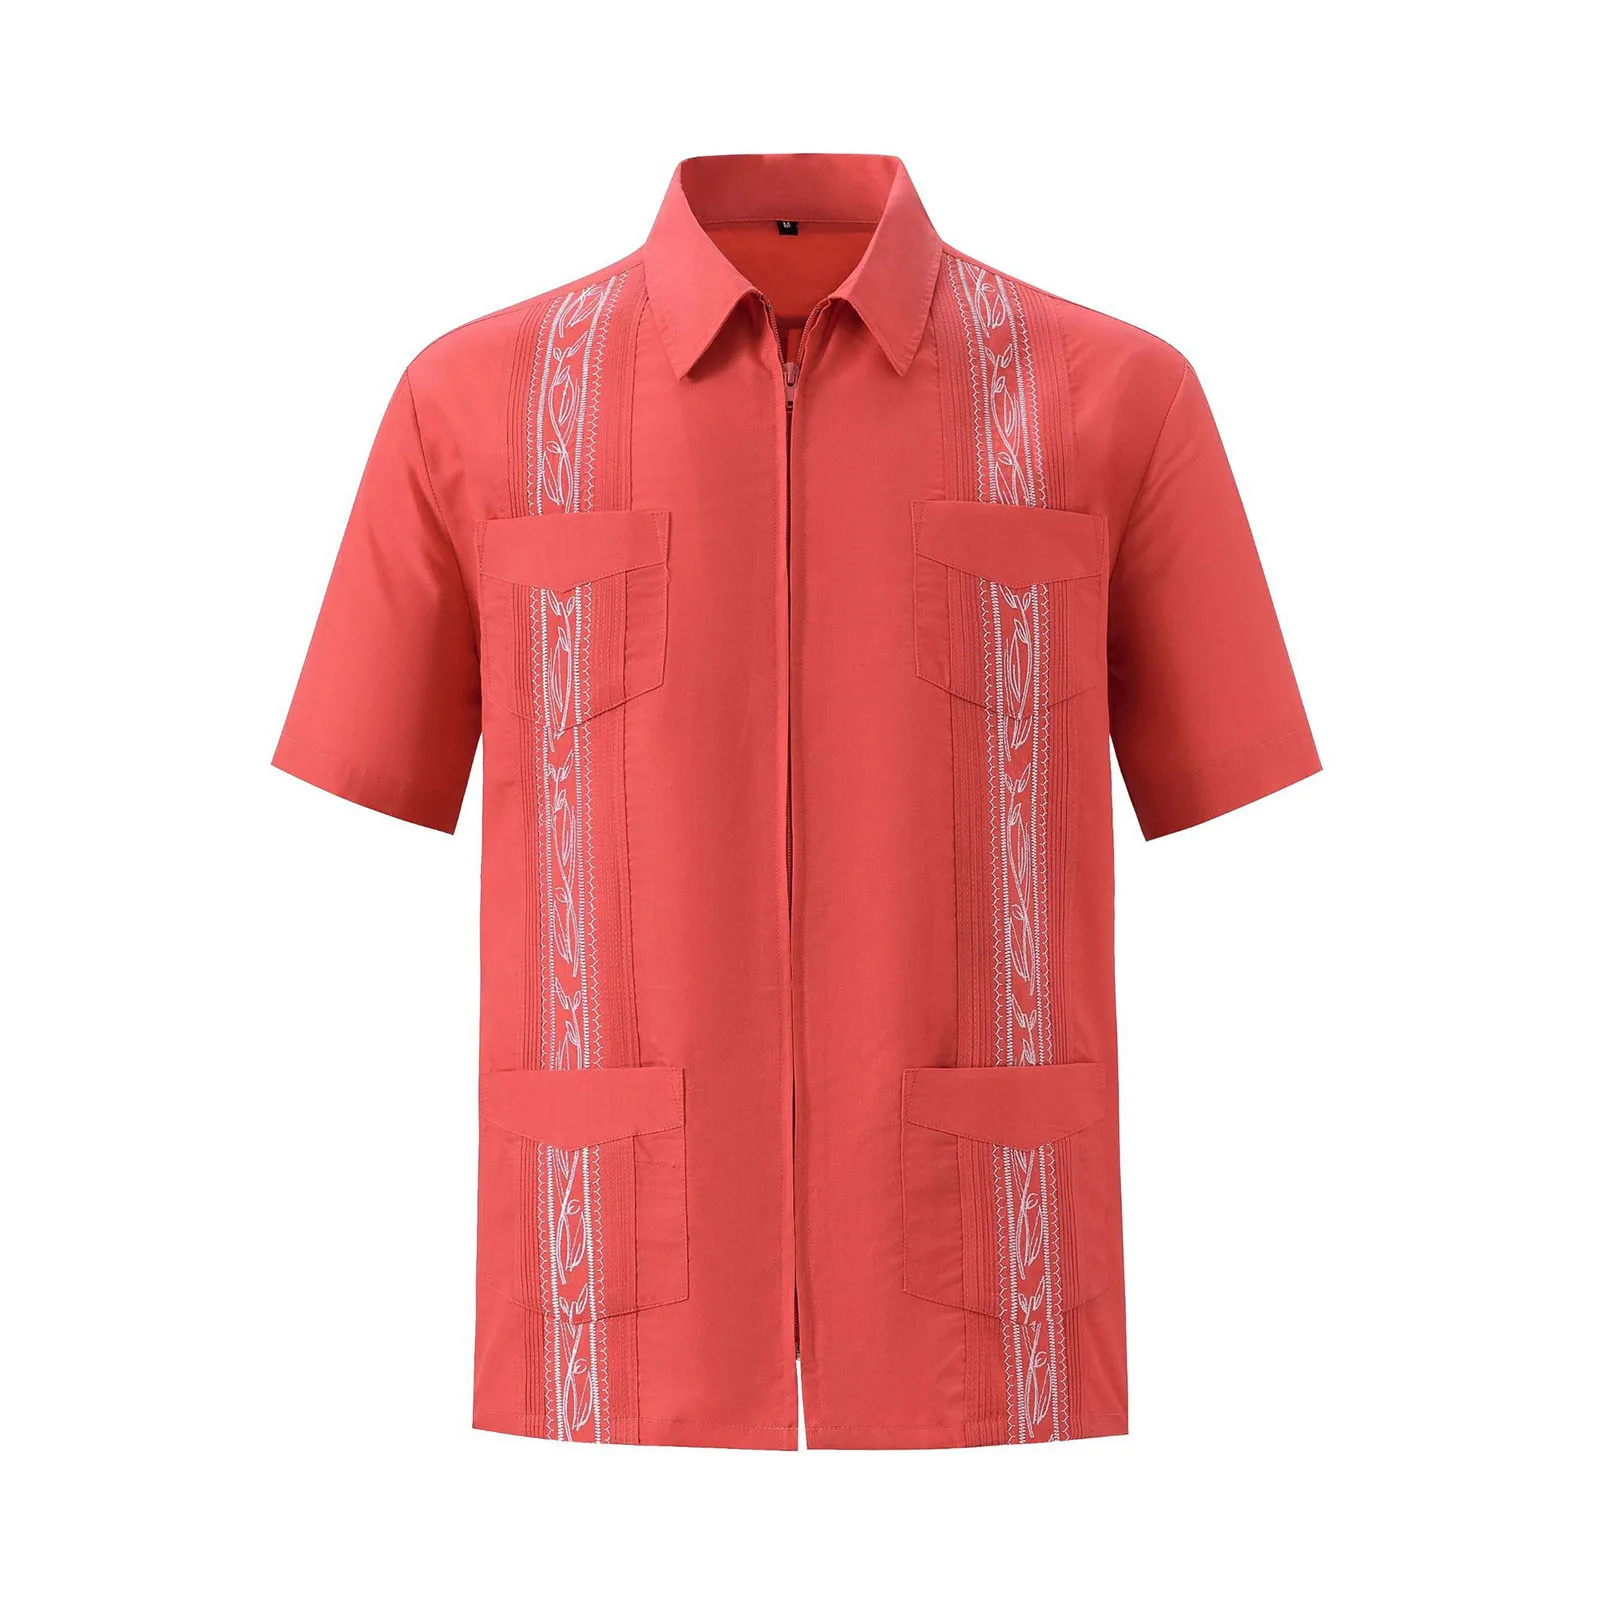 Men's Embroidery Shirt Full Zipper Short Sleeve Turn Down Collar Guayabera Shirts With Pockets Summer Vintage Mexican Shirt Tops red butterfly quinceanera dresses with cape lace applique beads tull sweet 16 dress mexican prom gowns vestidos 15 de xv anos